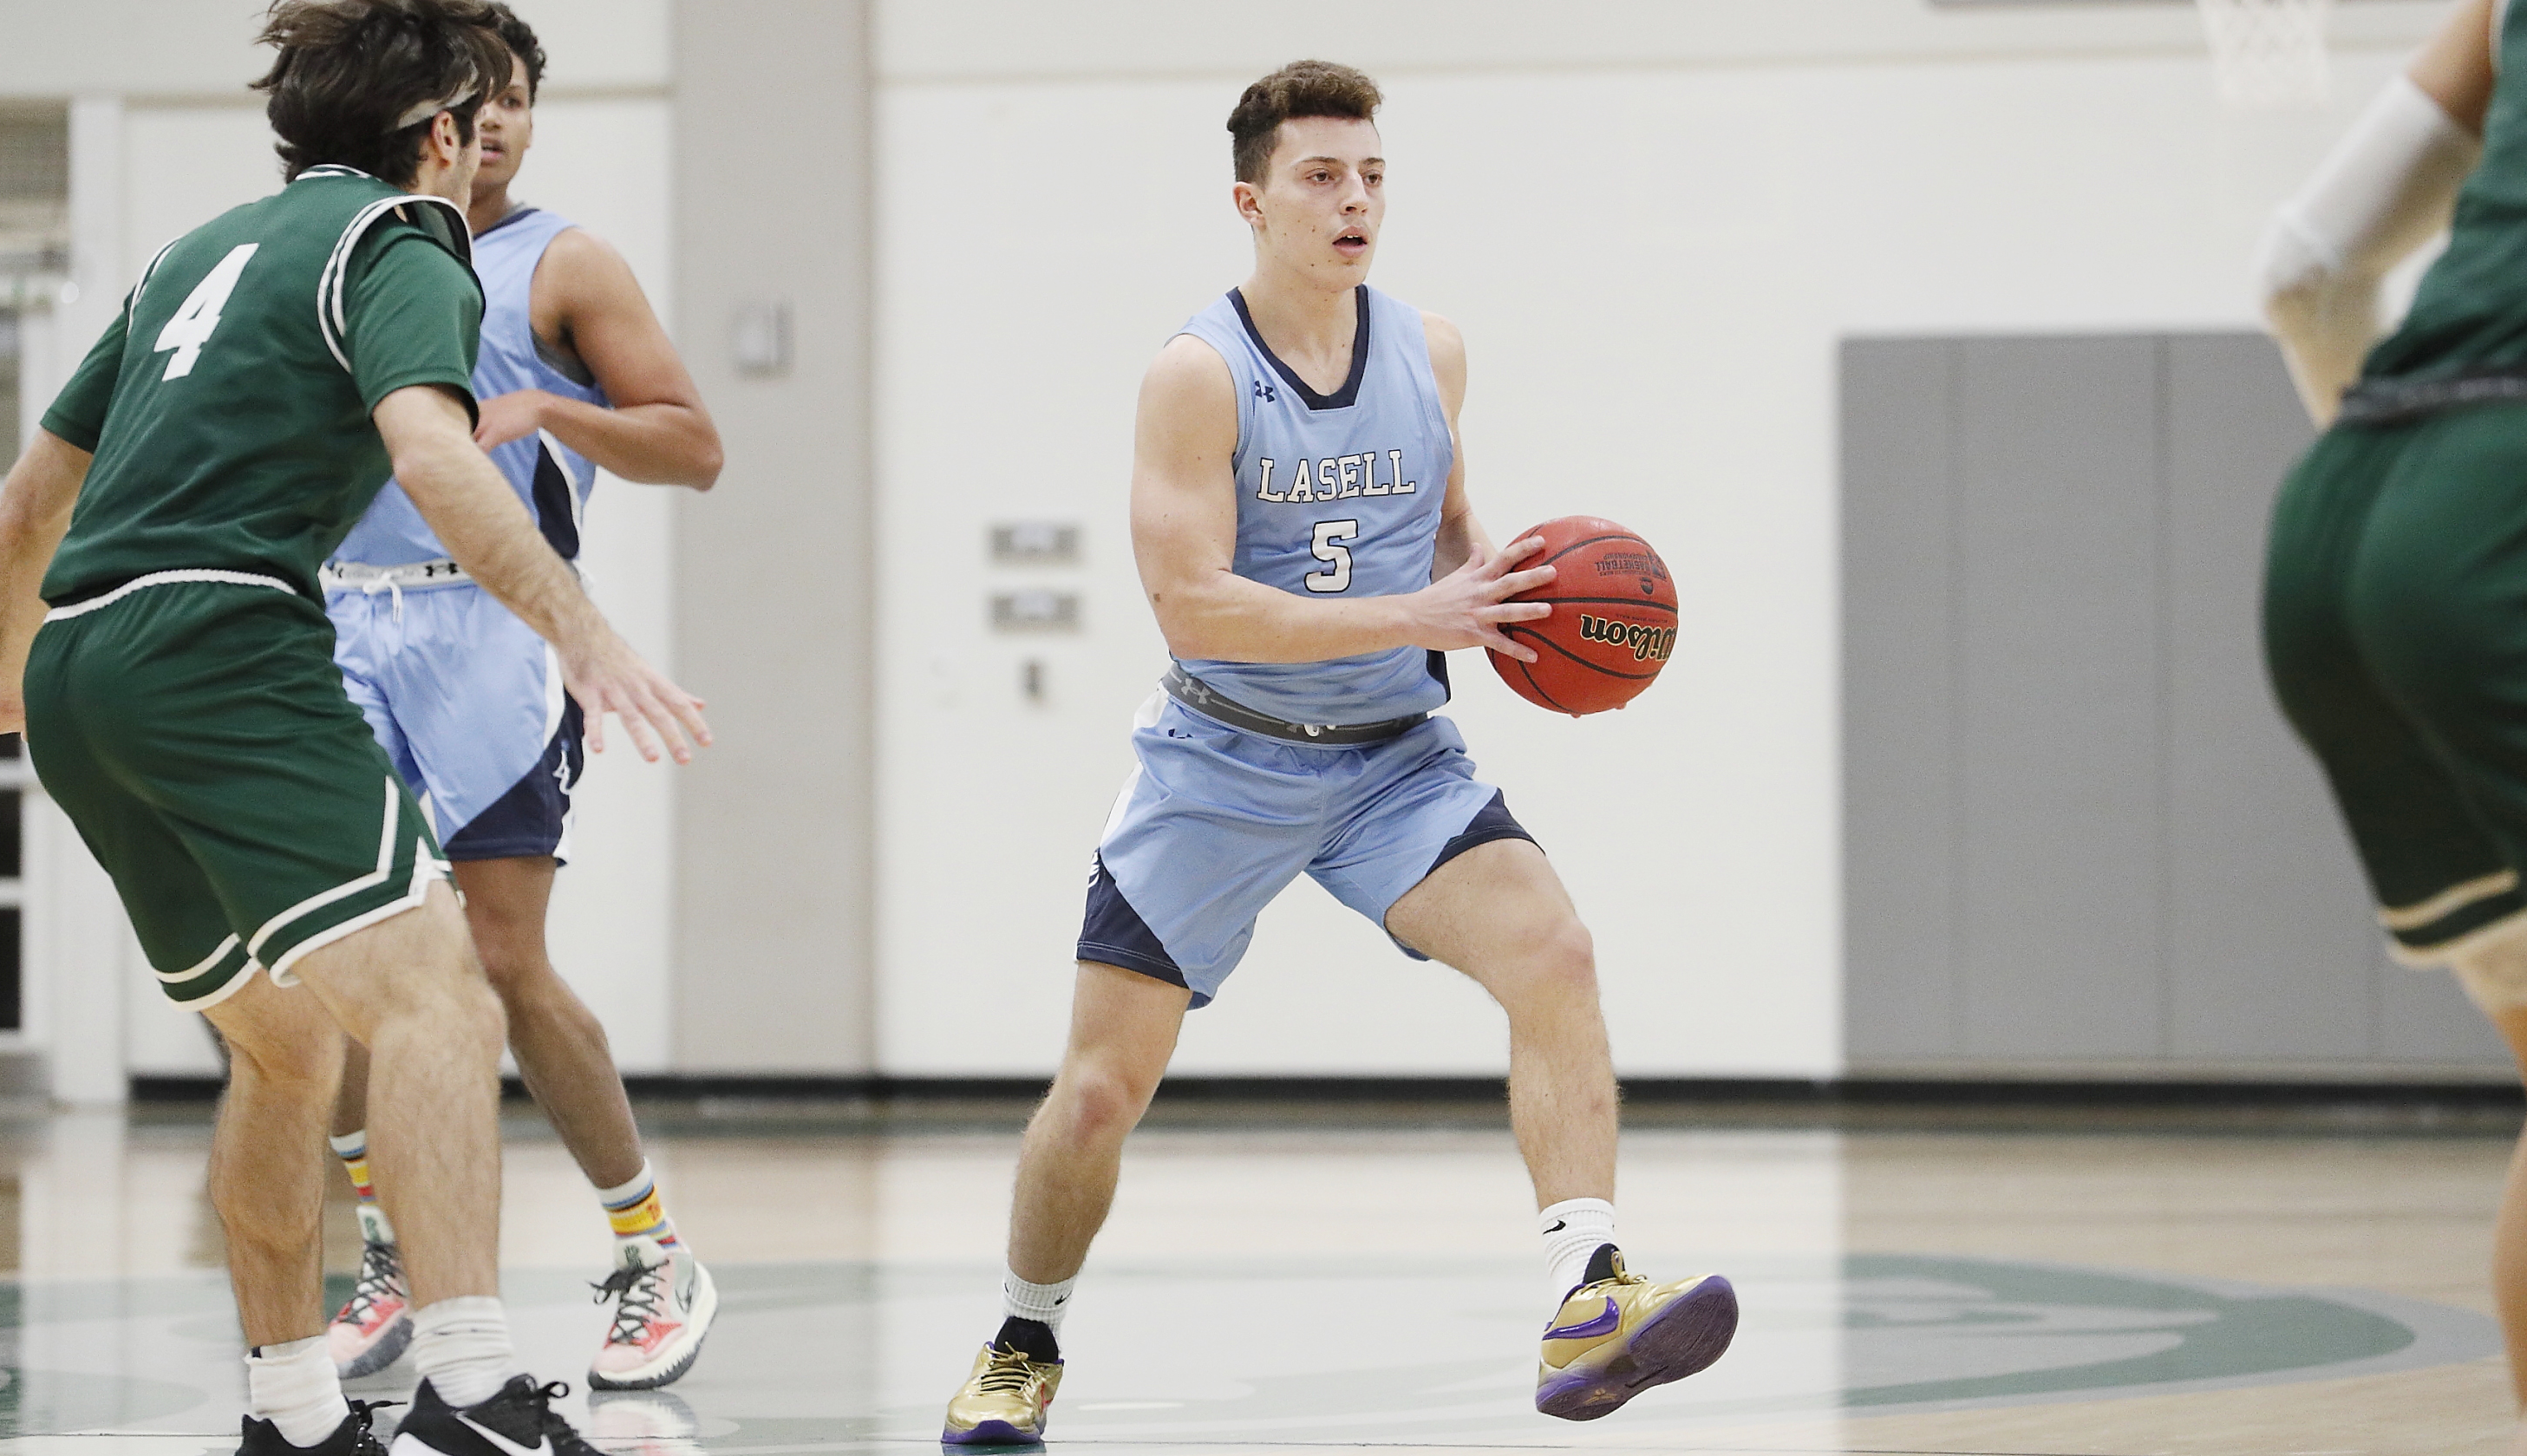 MBK: Lasell's strong second half propels them to victory in GNAC opener